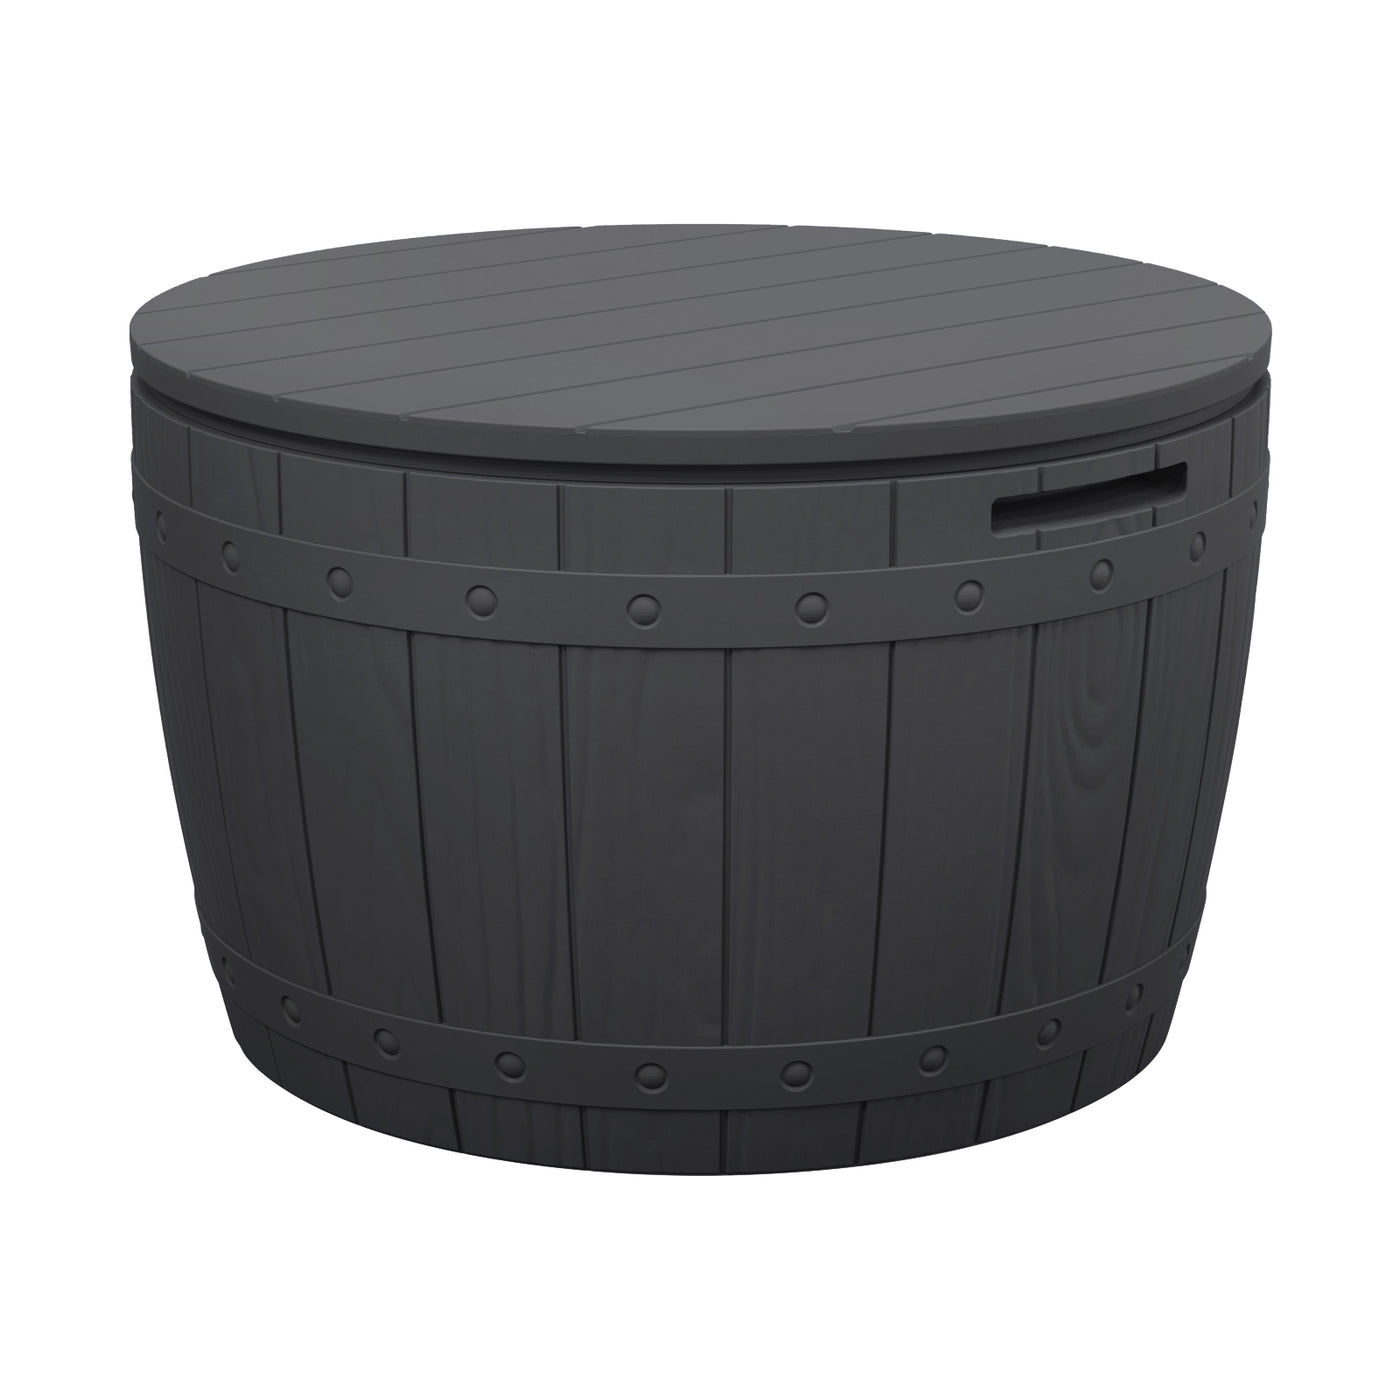 33 Gallon 3-in-1 Deck Storage Box Container Patio Table Round Bench Chair with Wood-Like Texture for Cushions, Pool Accessories, Outdoor Toys, Furniture Decor